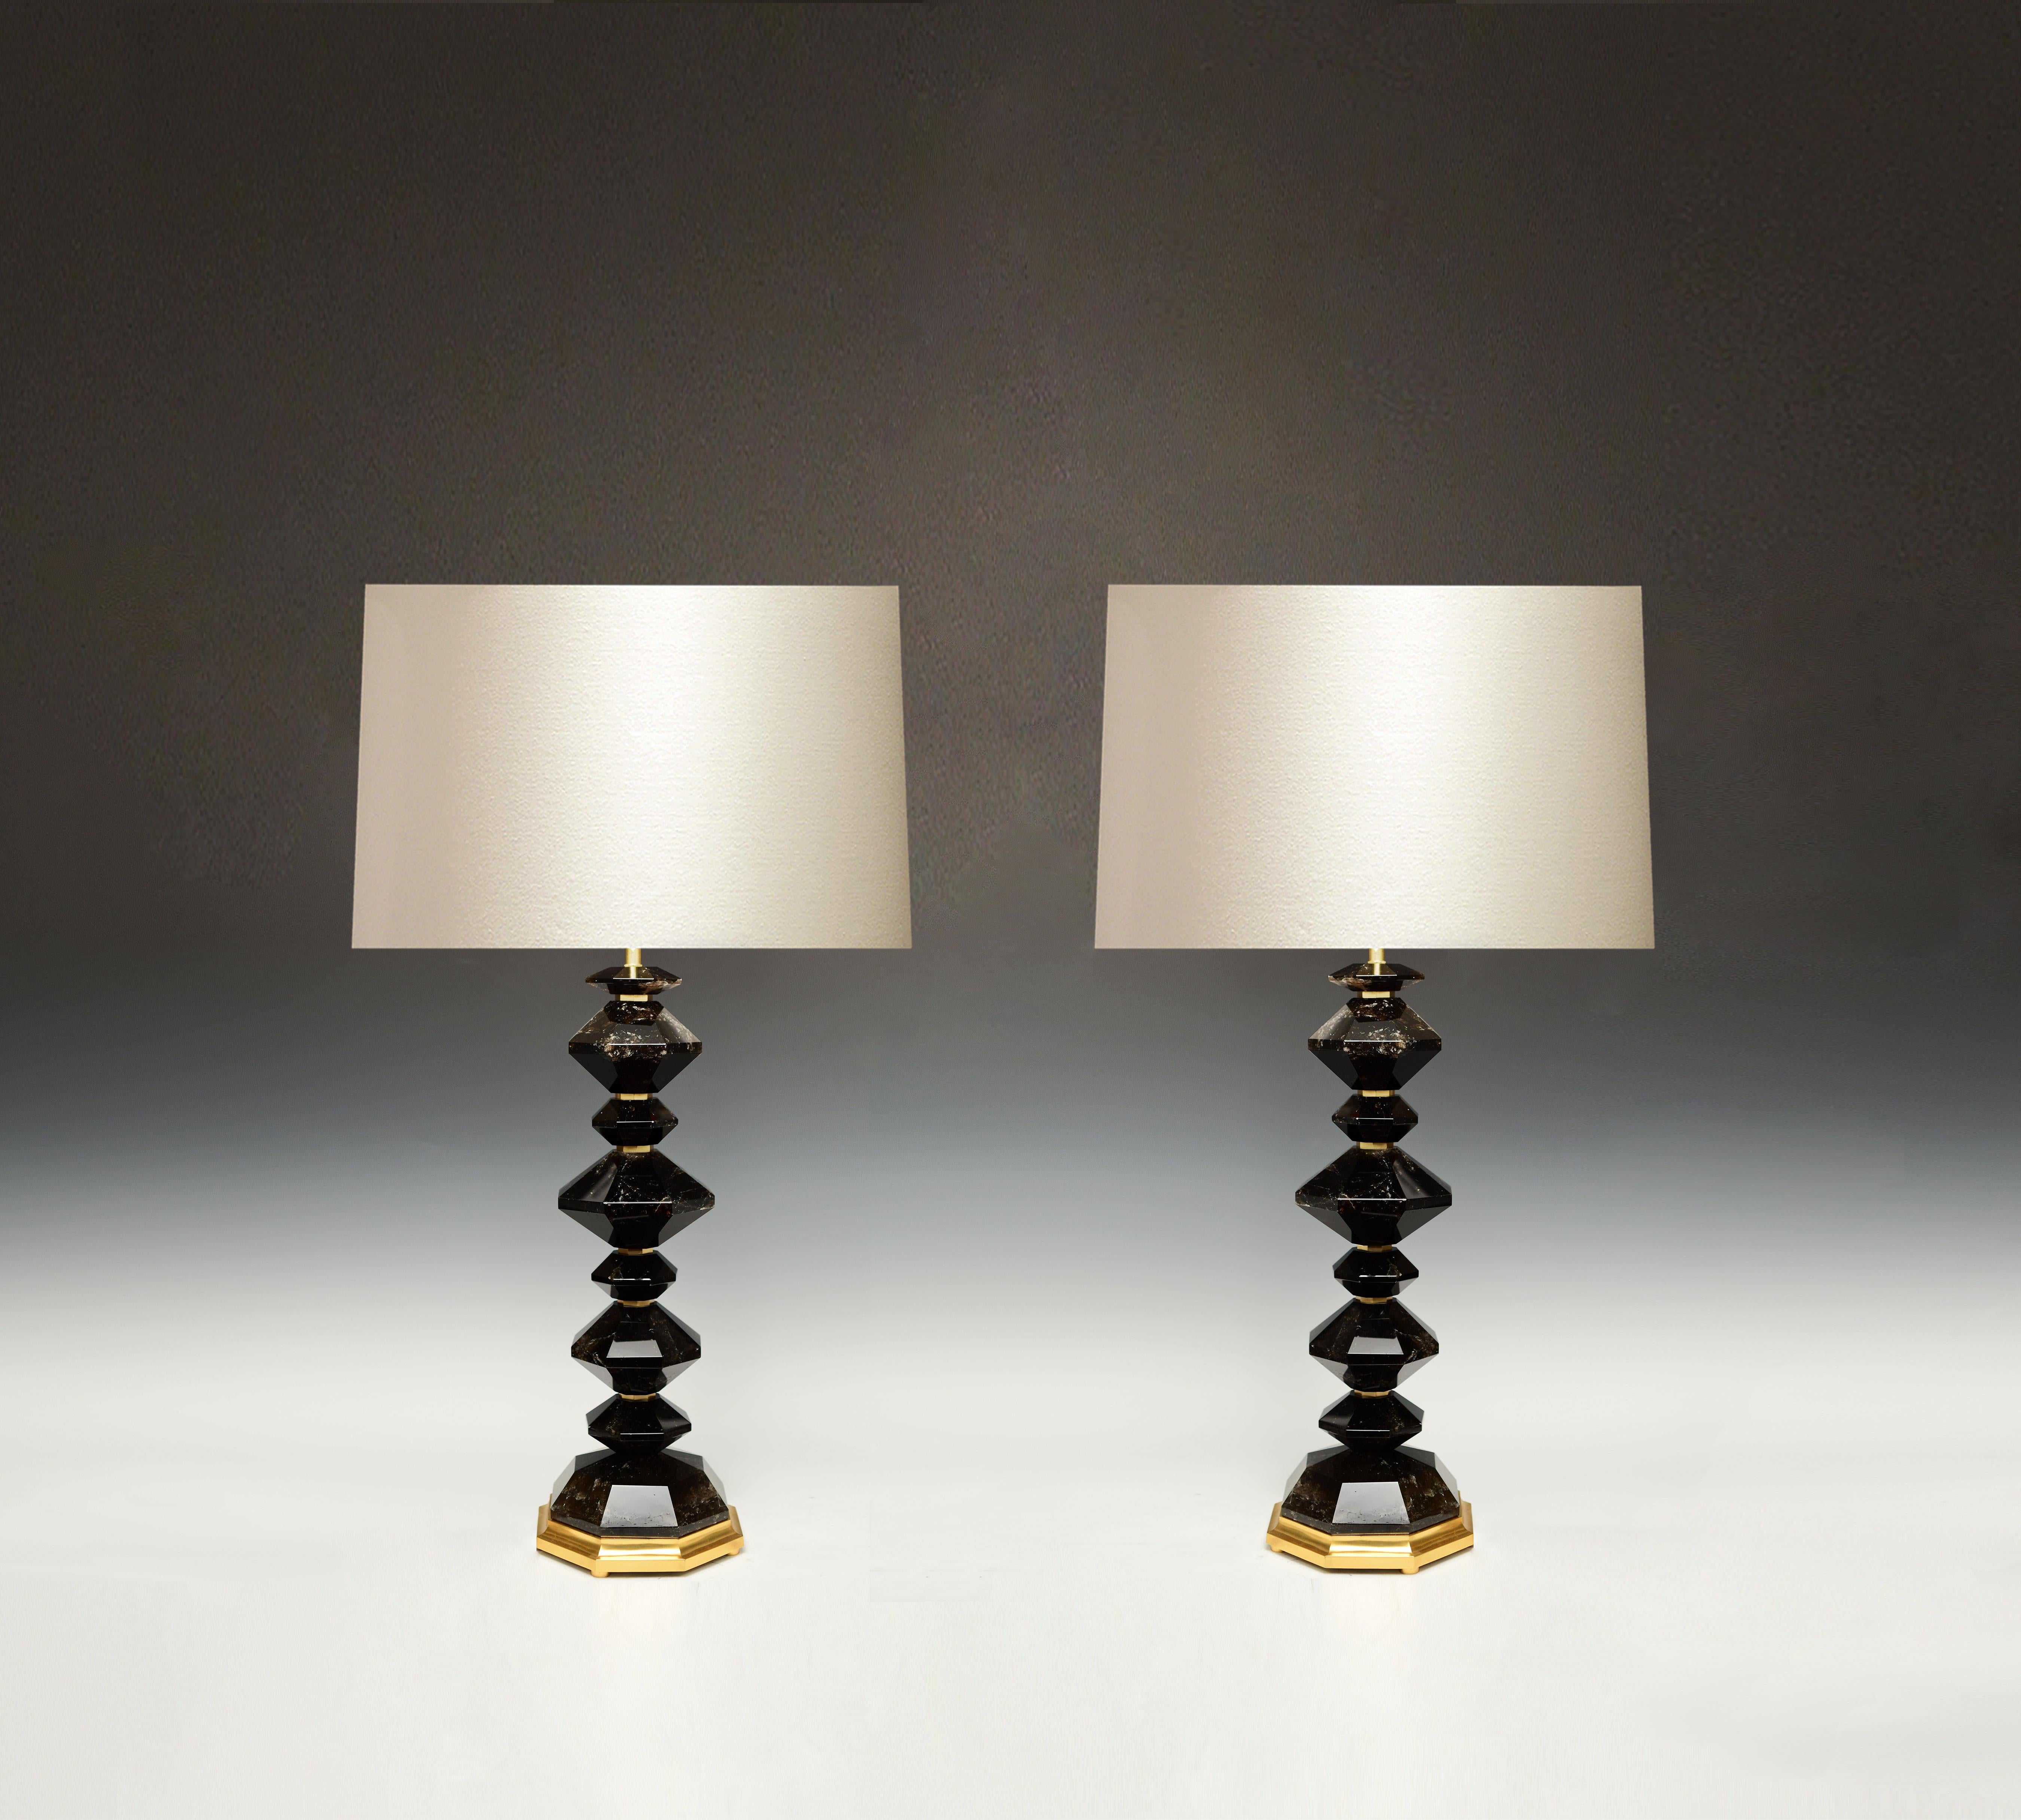 A pair of fine carved dark diamond rock crystal lamps with polish brass parts and bases, created by Phoenix Gallery, NYC.
Available in nickel plating and antique brass finished. 
To the rock crystal: 18.5 in/H.
(Lampshade not included). 
 